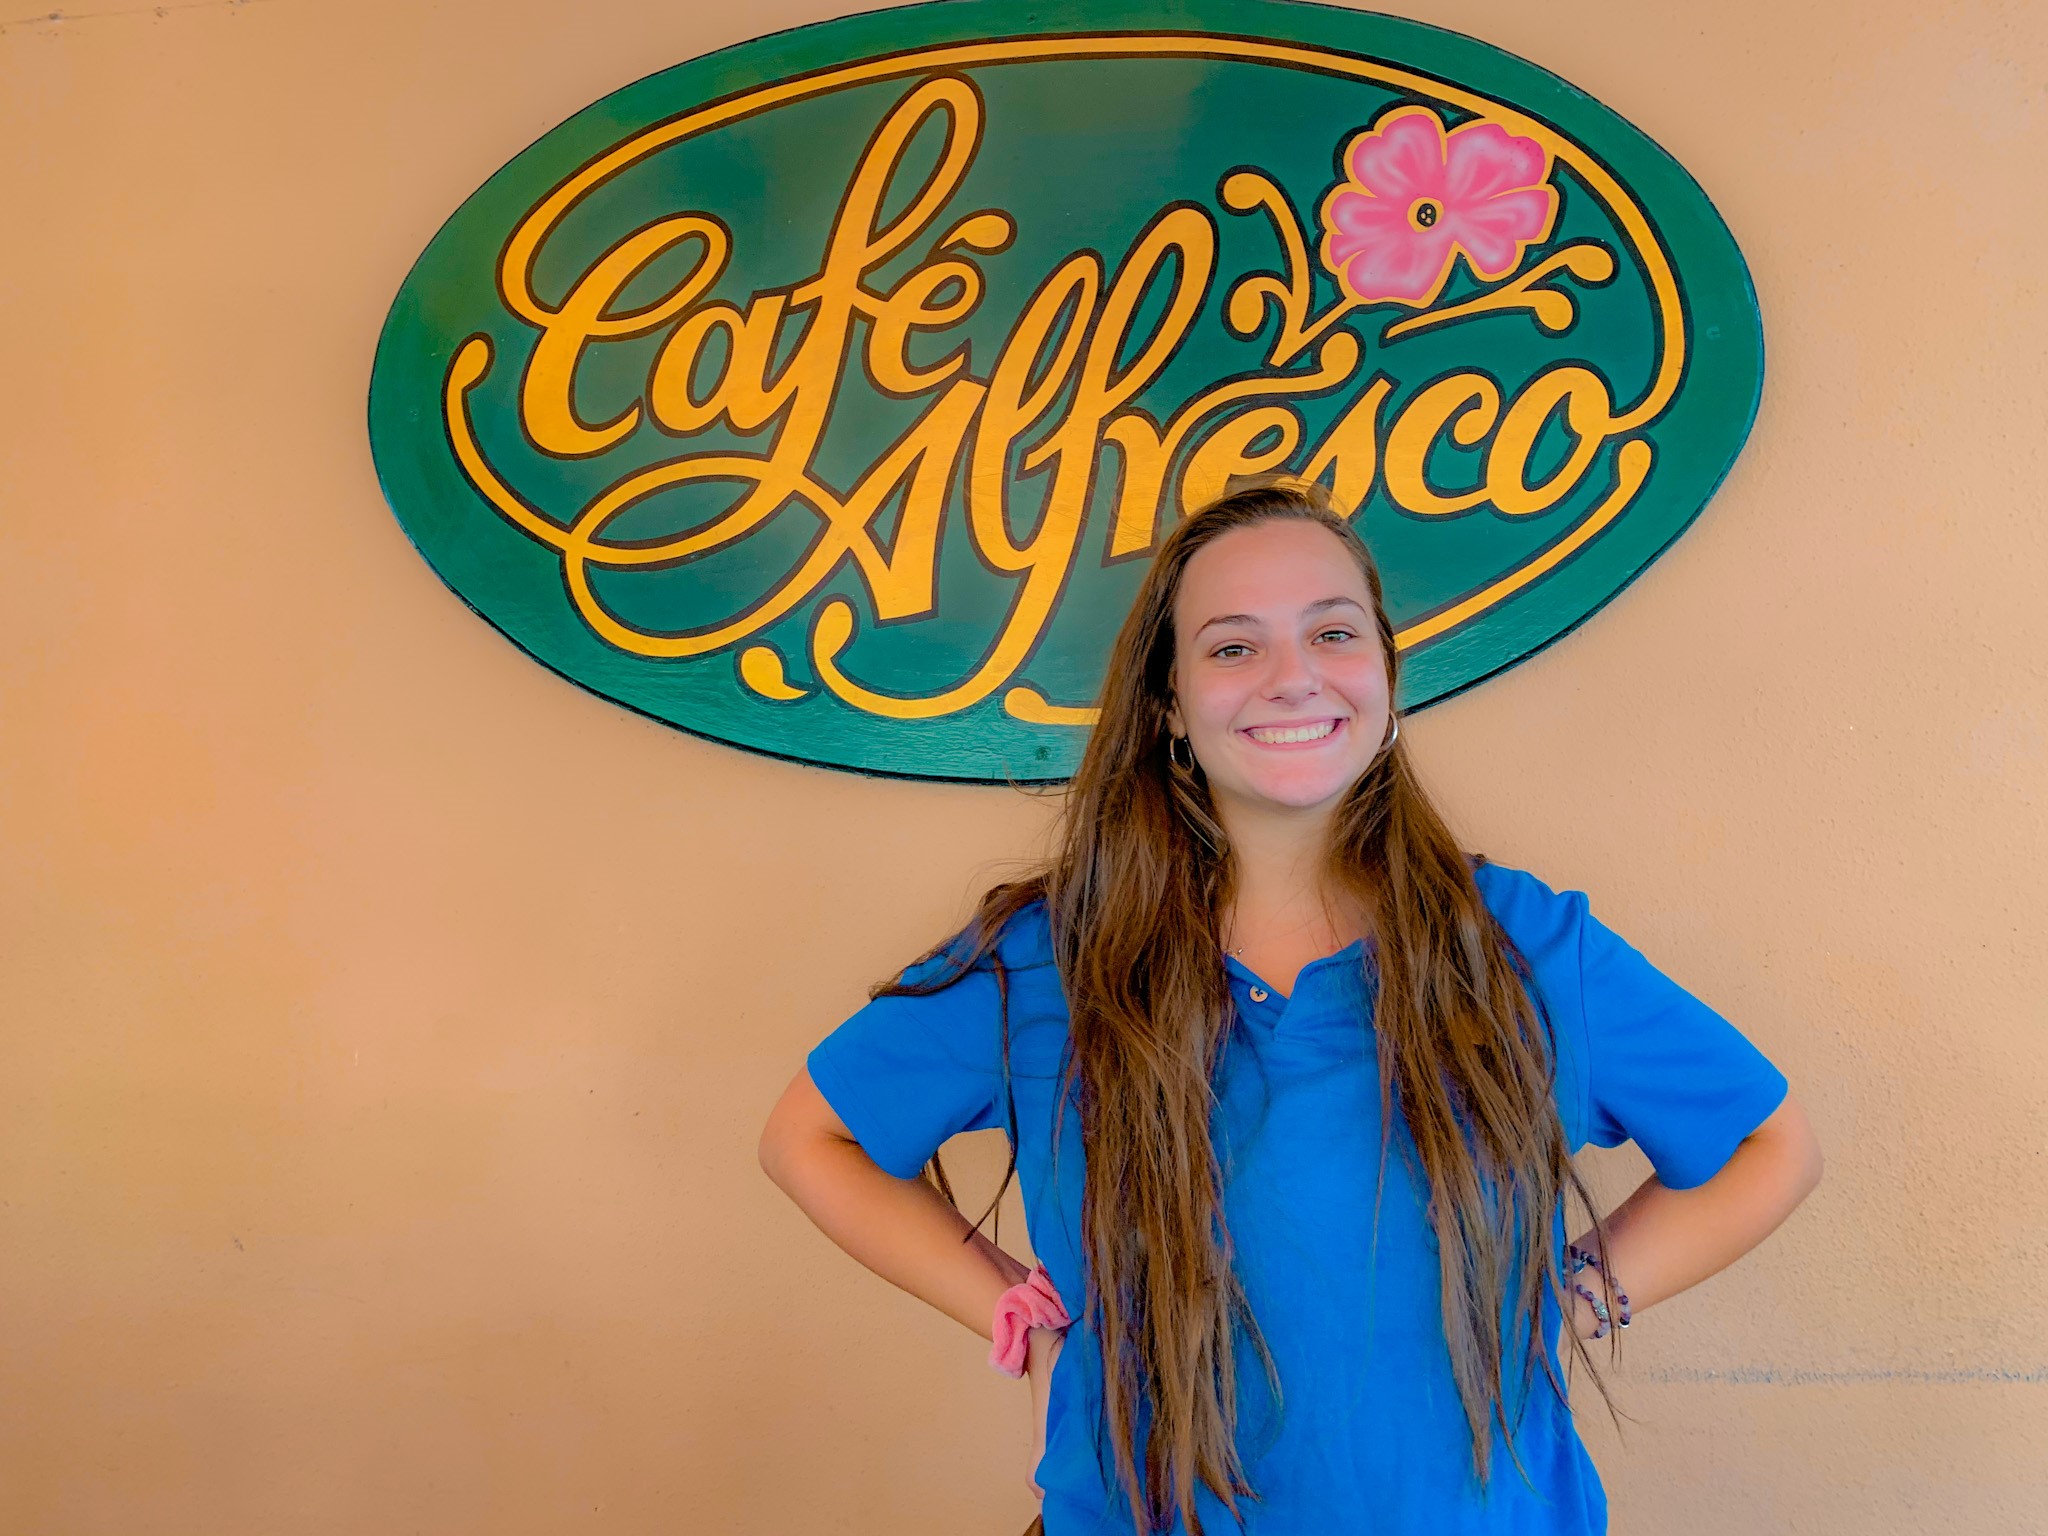 Emily, a server at Café Alfresco, standing in front of the restaurant's sign